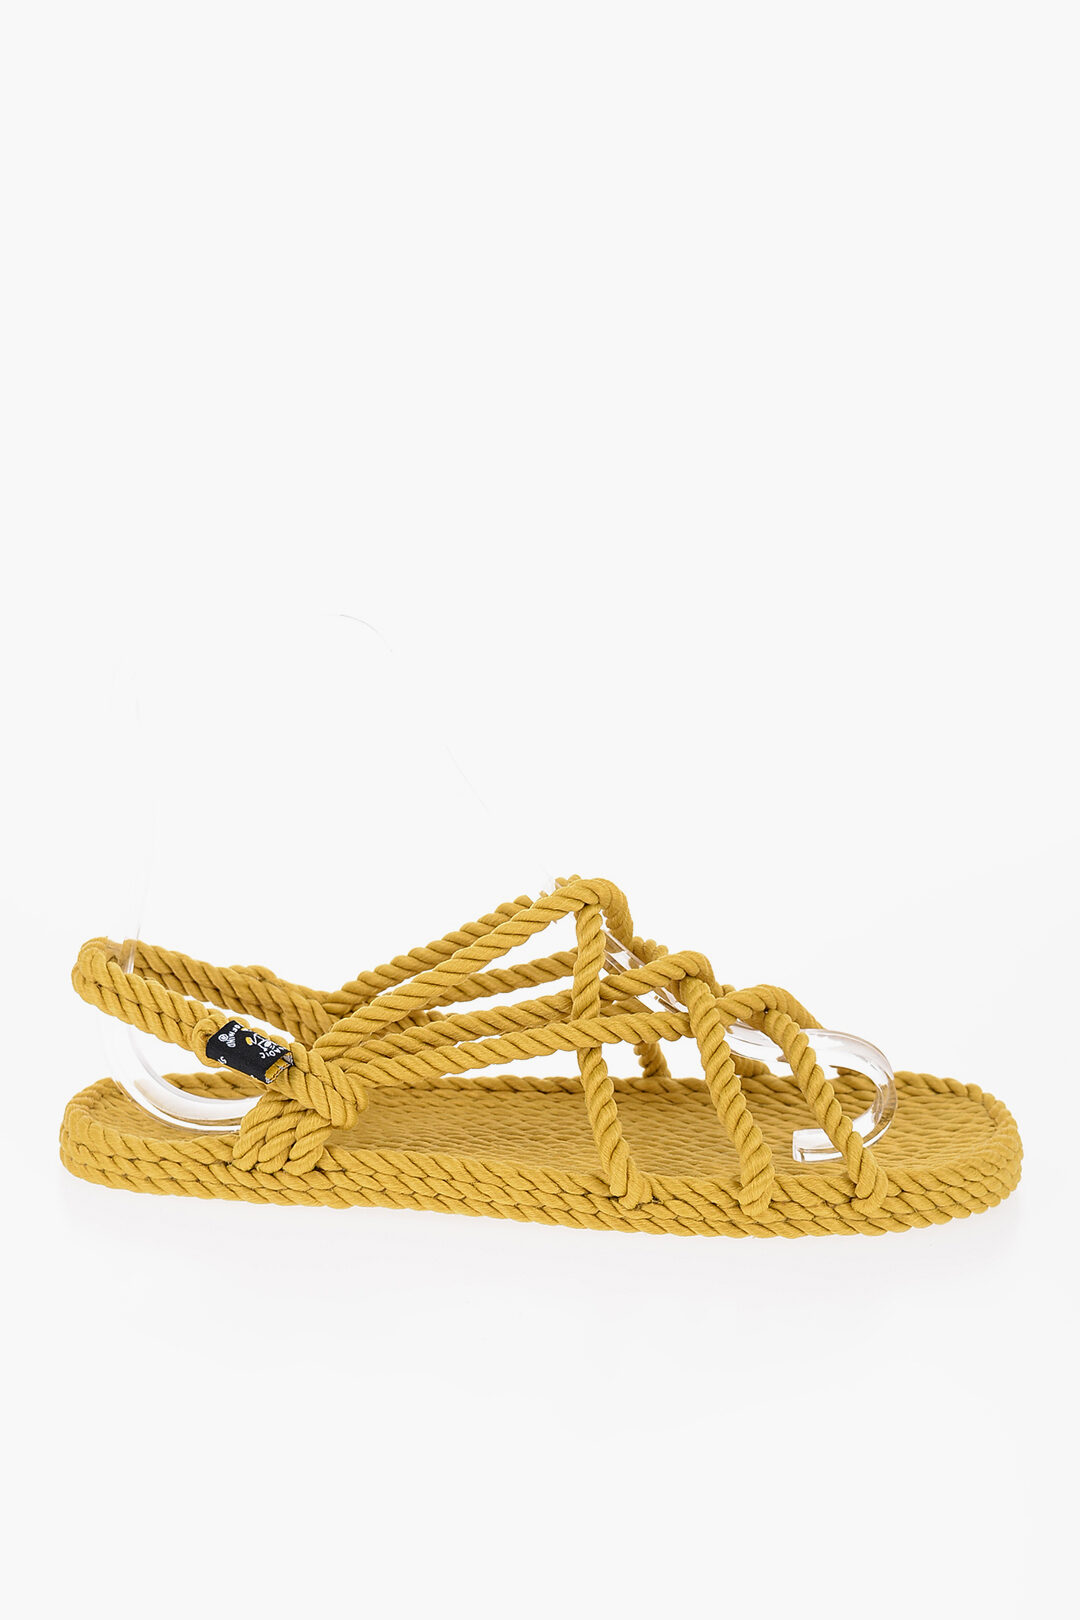 Nomadic State of Mind - The Full Nelson - The Original Rope Sandals - –  Nomadz - Nomadic State of Mind Canada